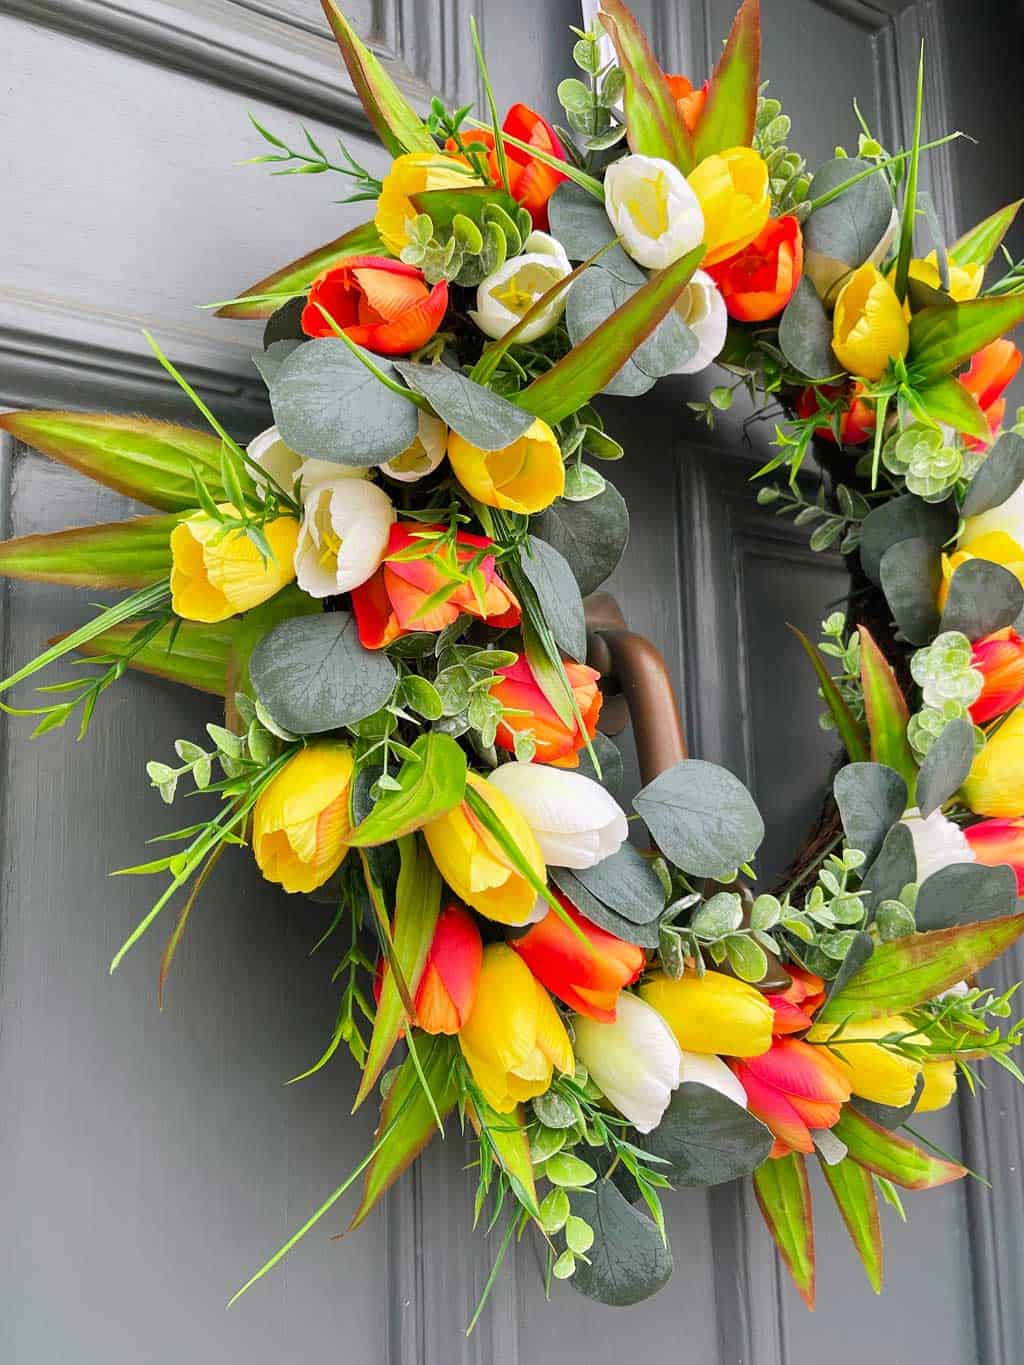 DIY spring wreaths for front door are so easy to make, using my simple tutorial.